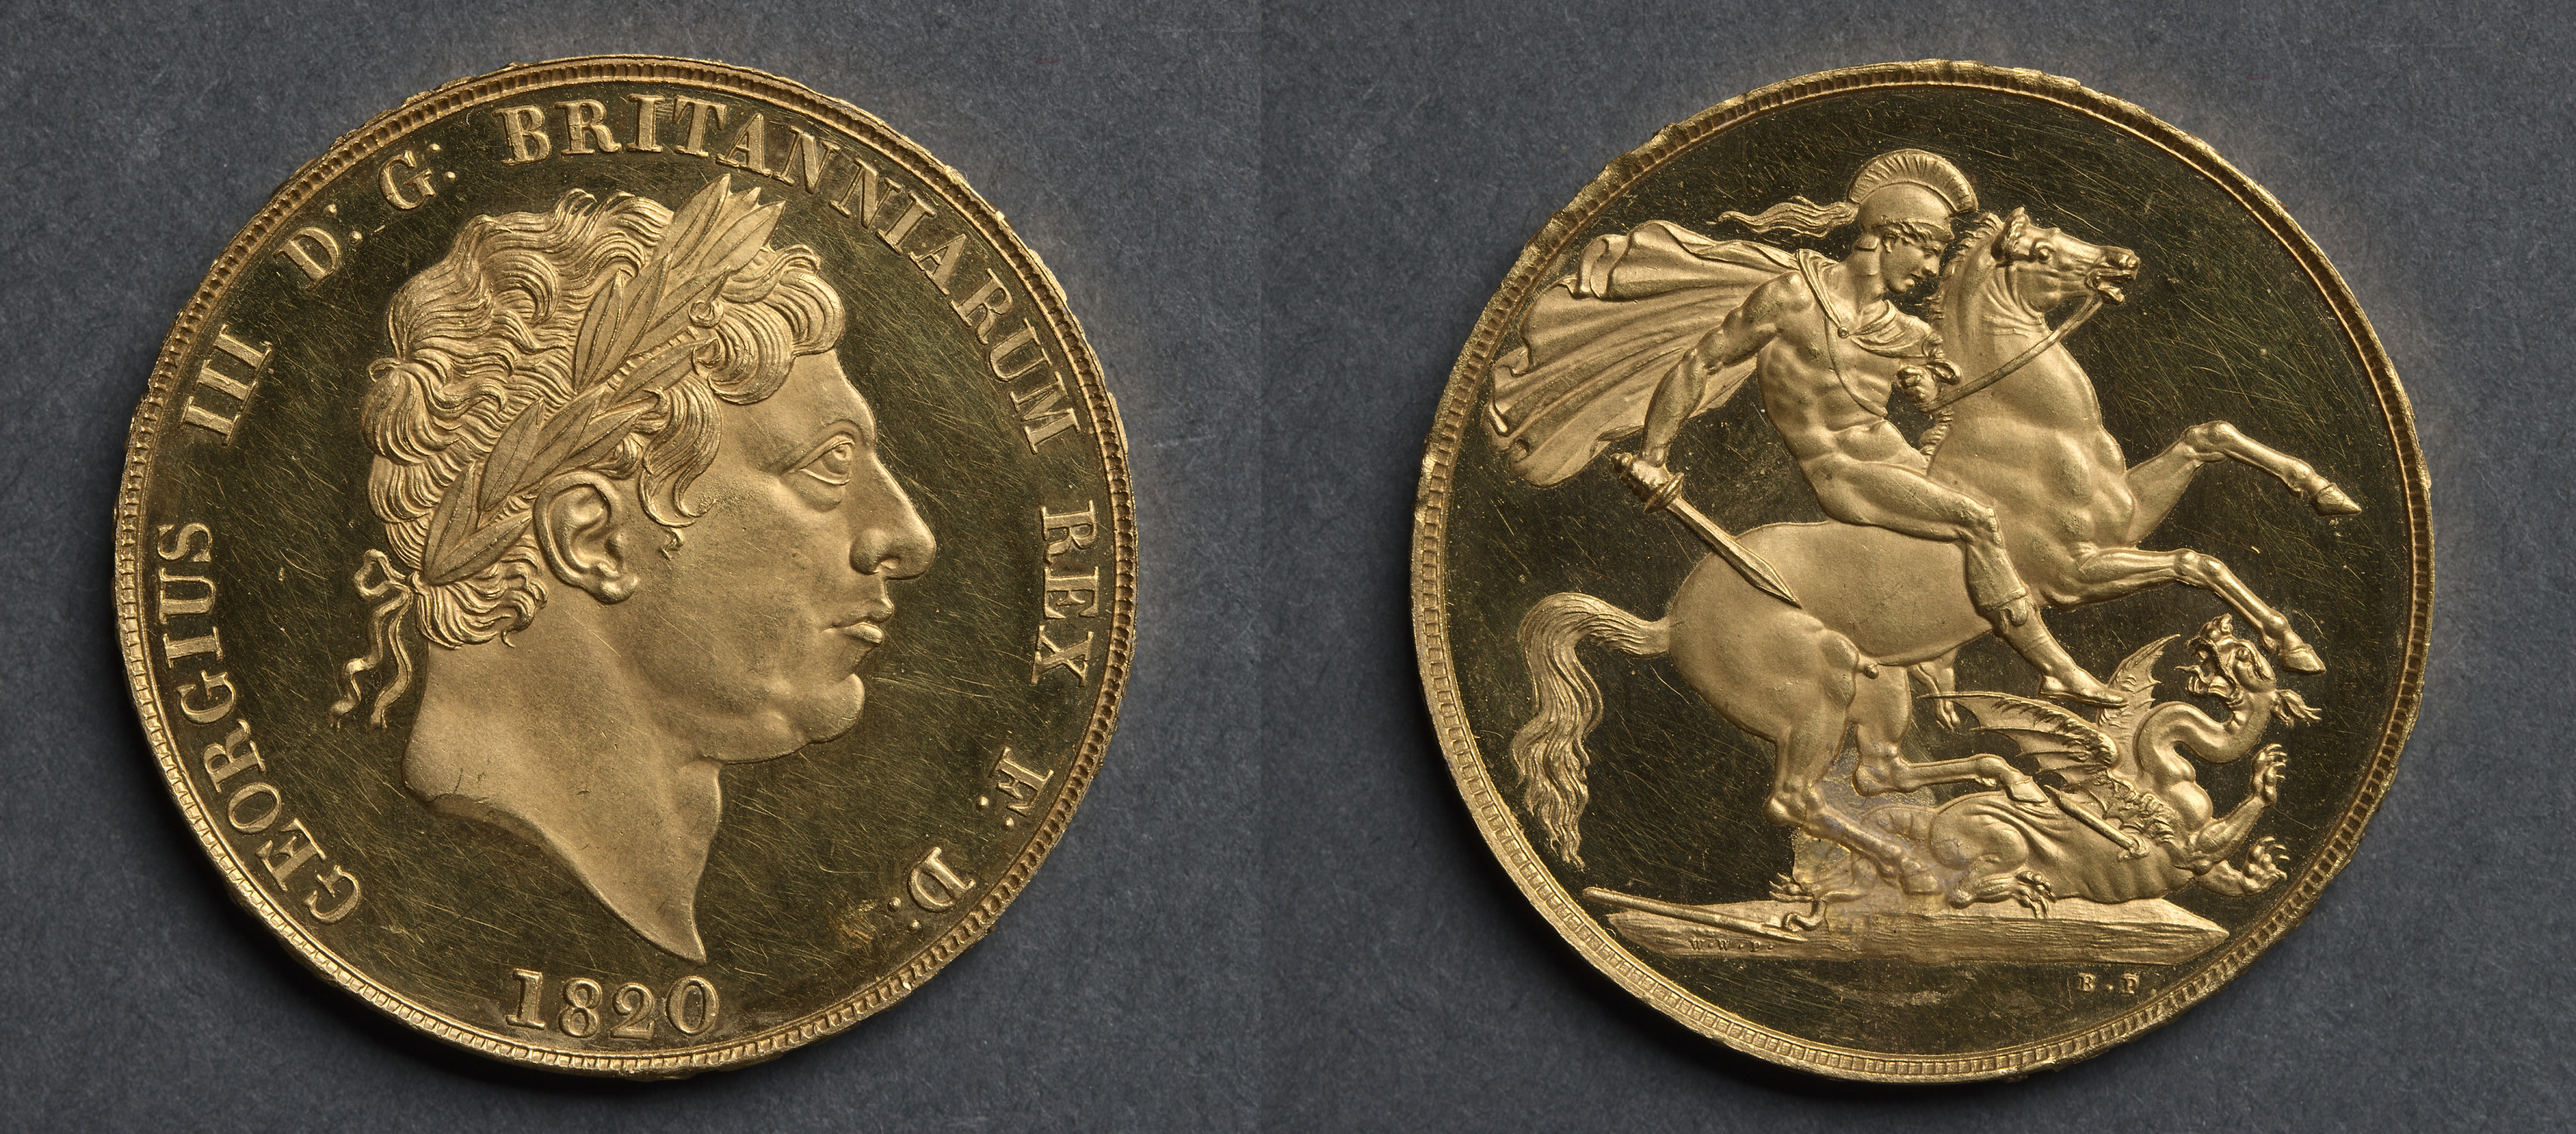 Two Pound Piece: George III (obverse); St. George and the Dragon (reverse)